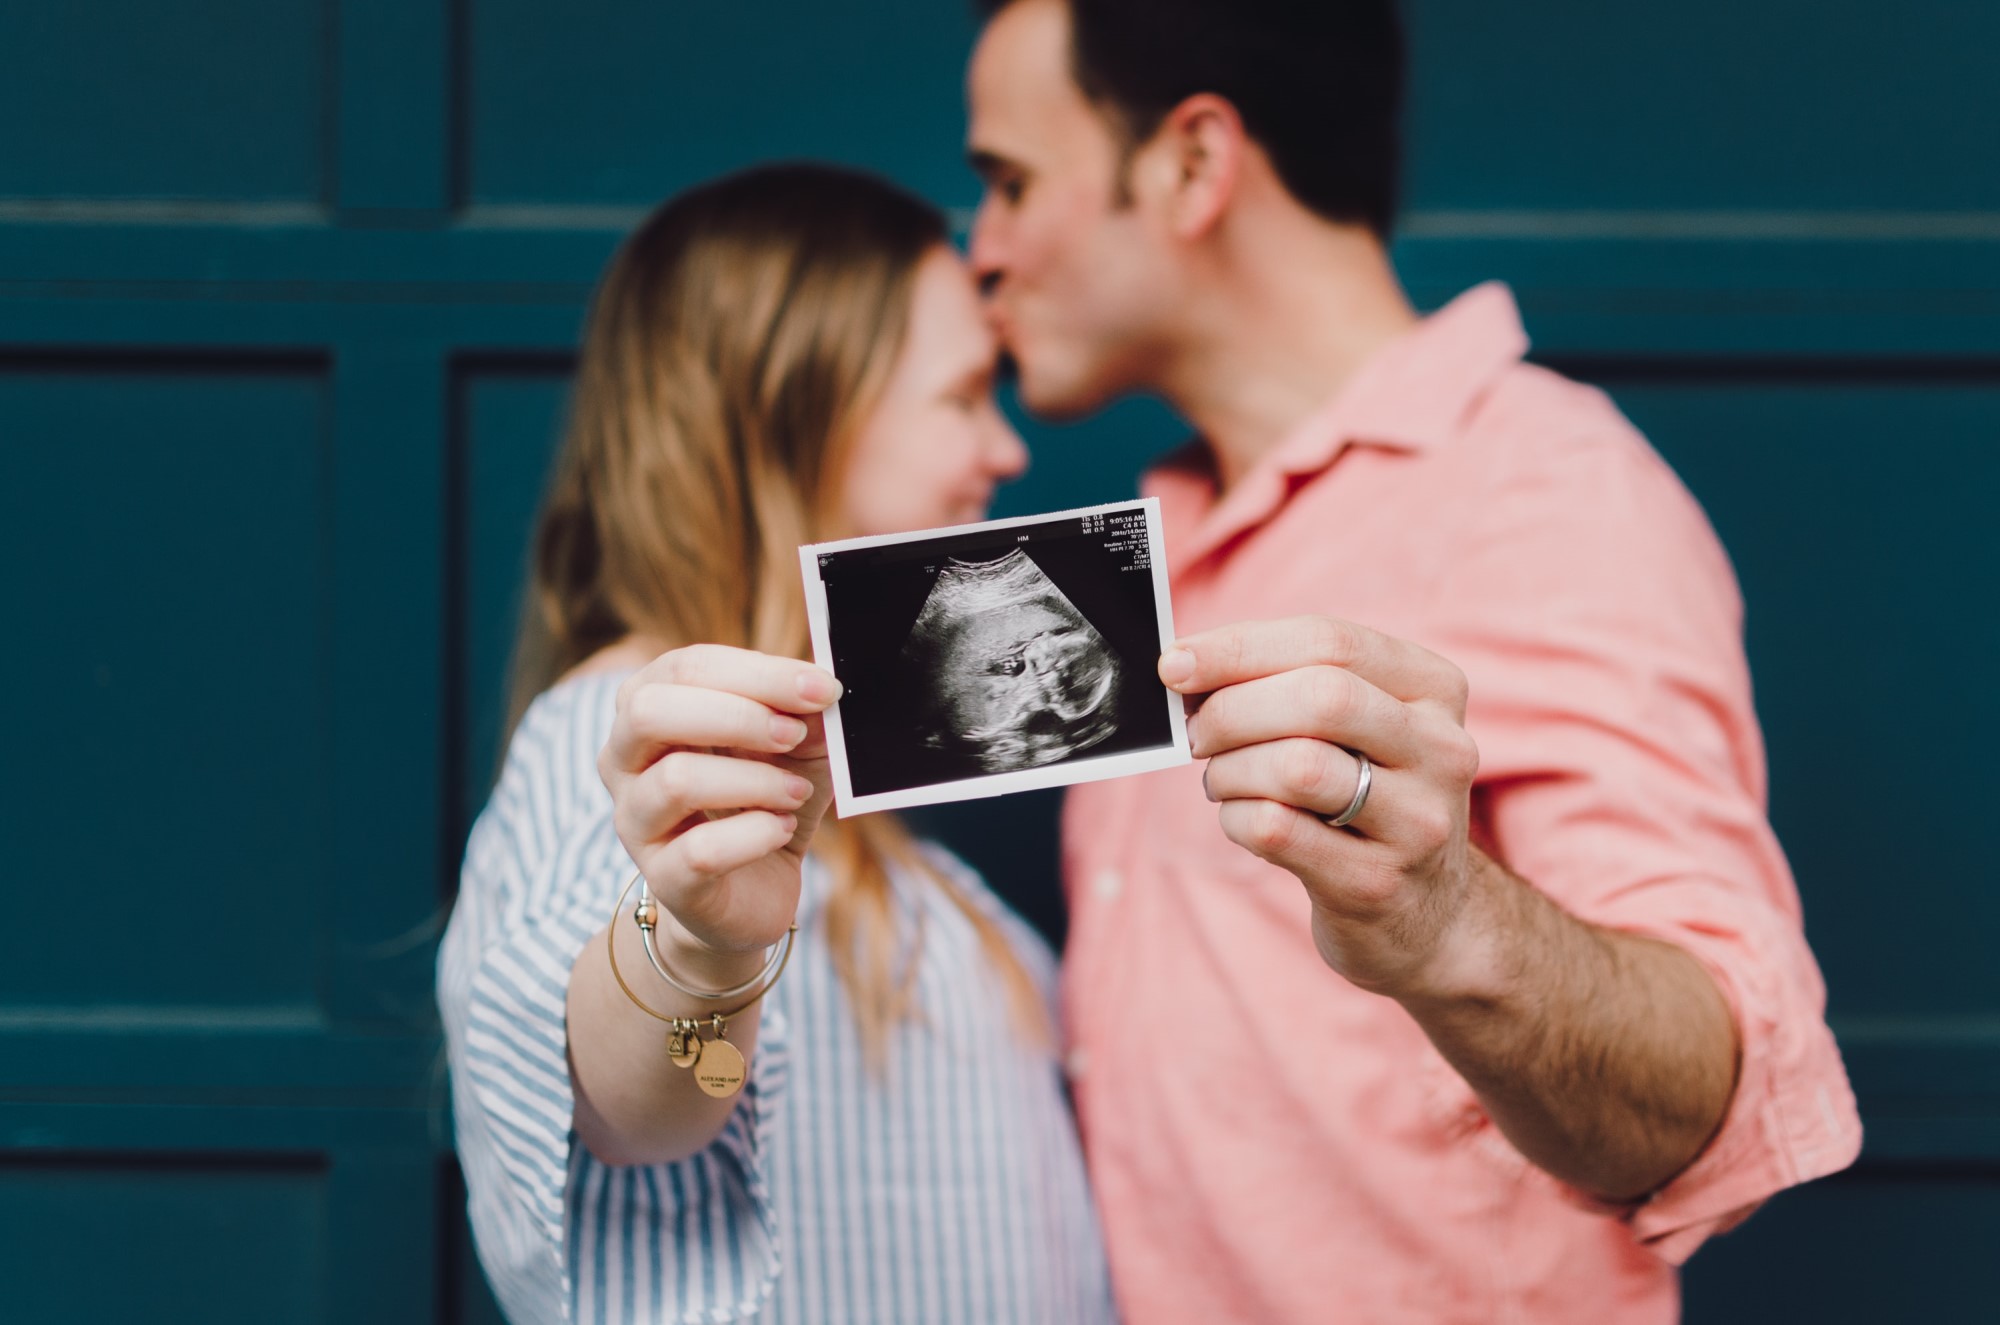 Ultrasound picture of baby being held by couple kissing in background